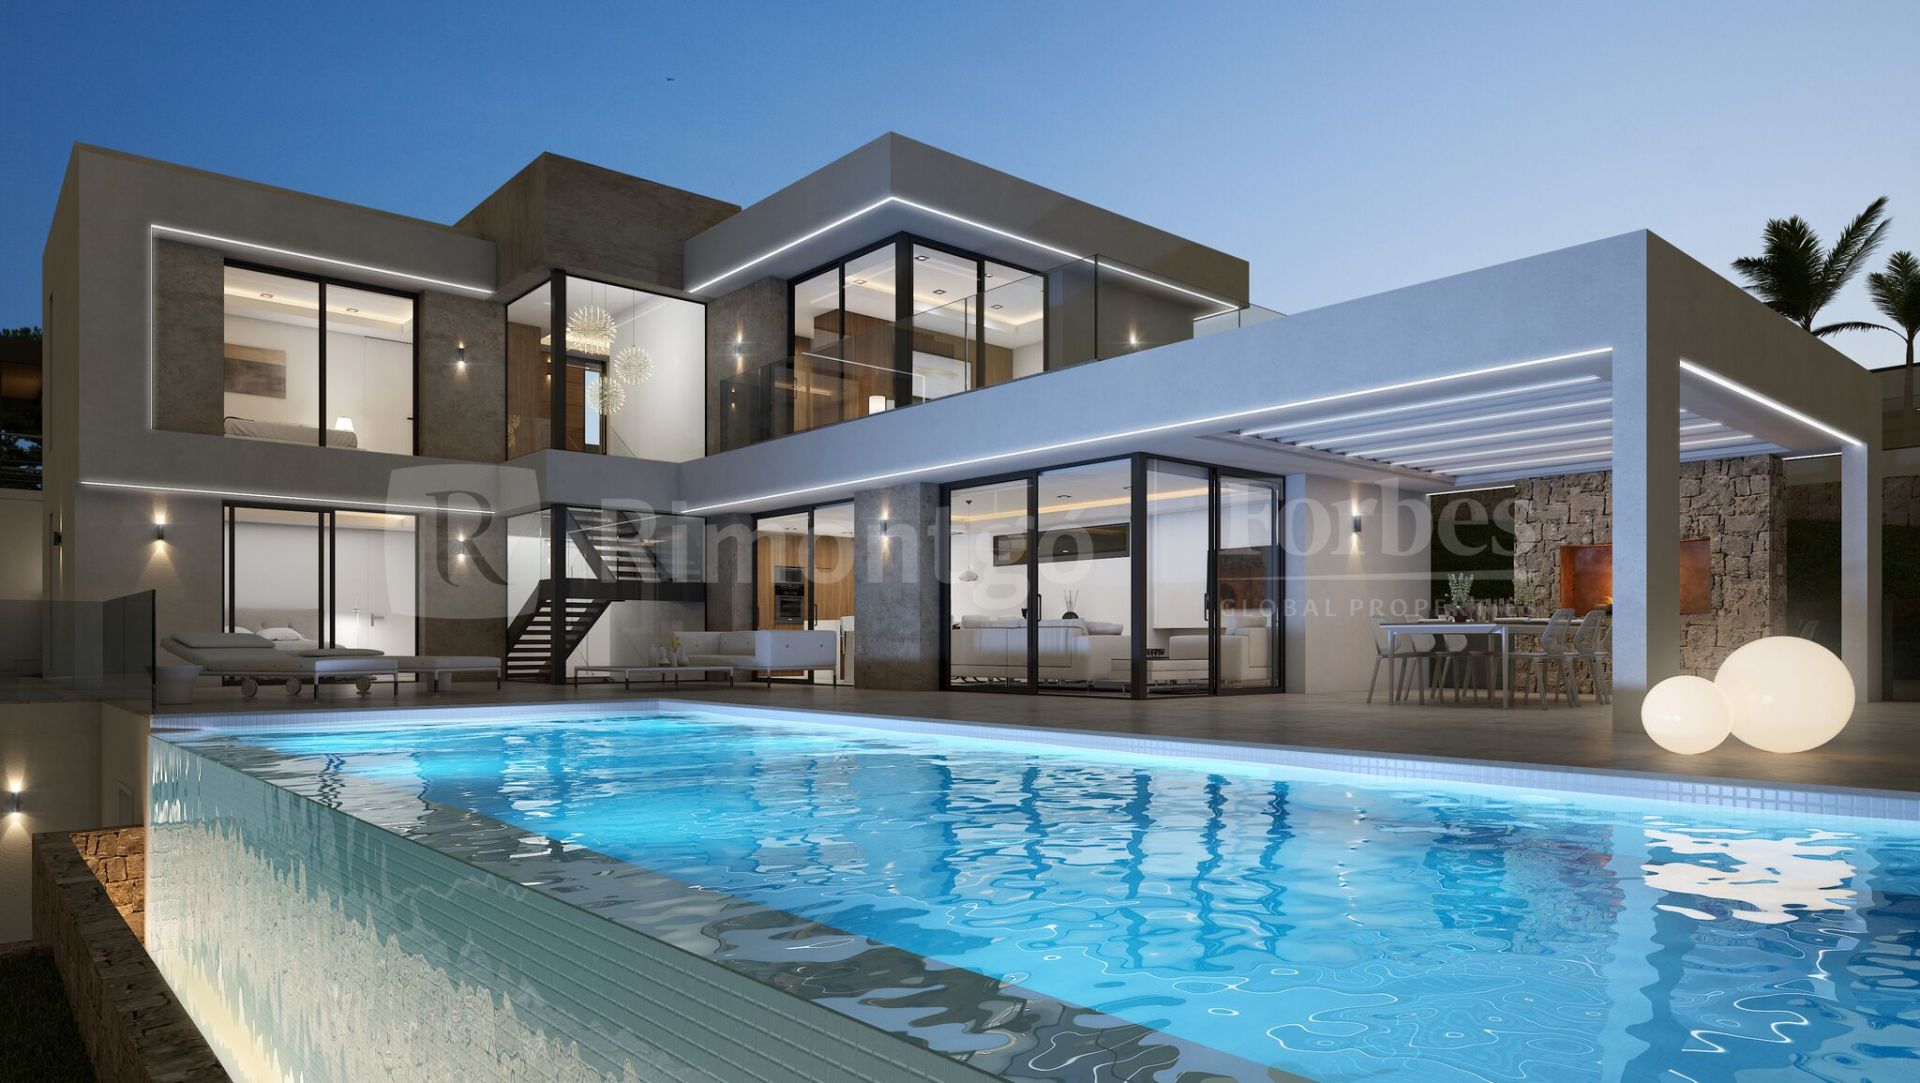 Luxurious villa with an ultramodern design and 2 pools in Javea.